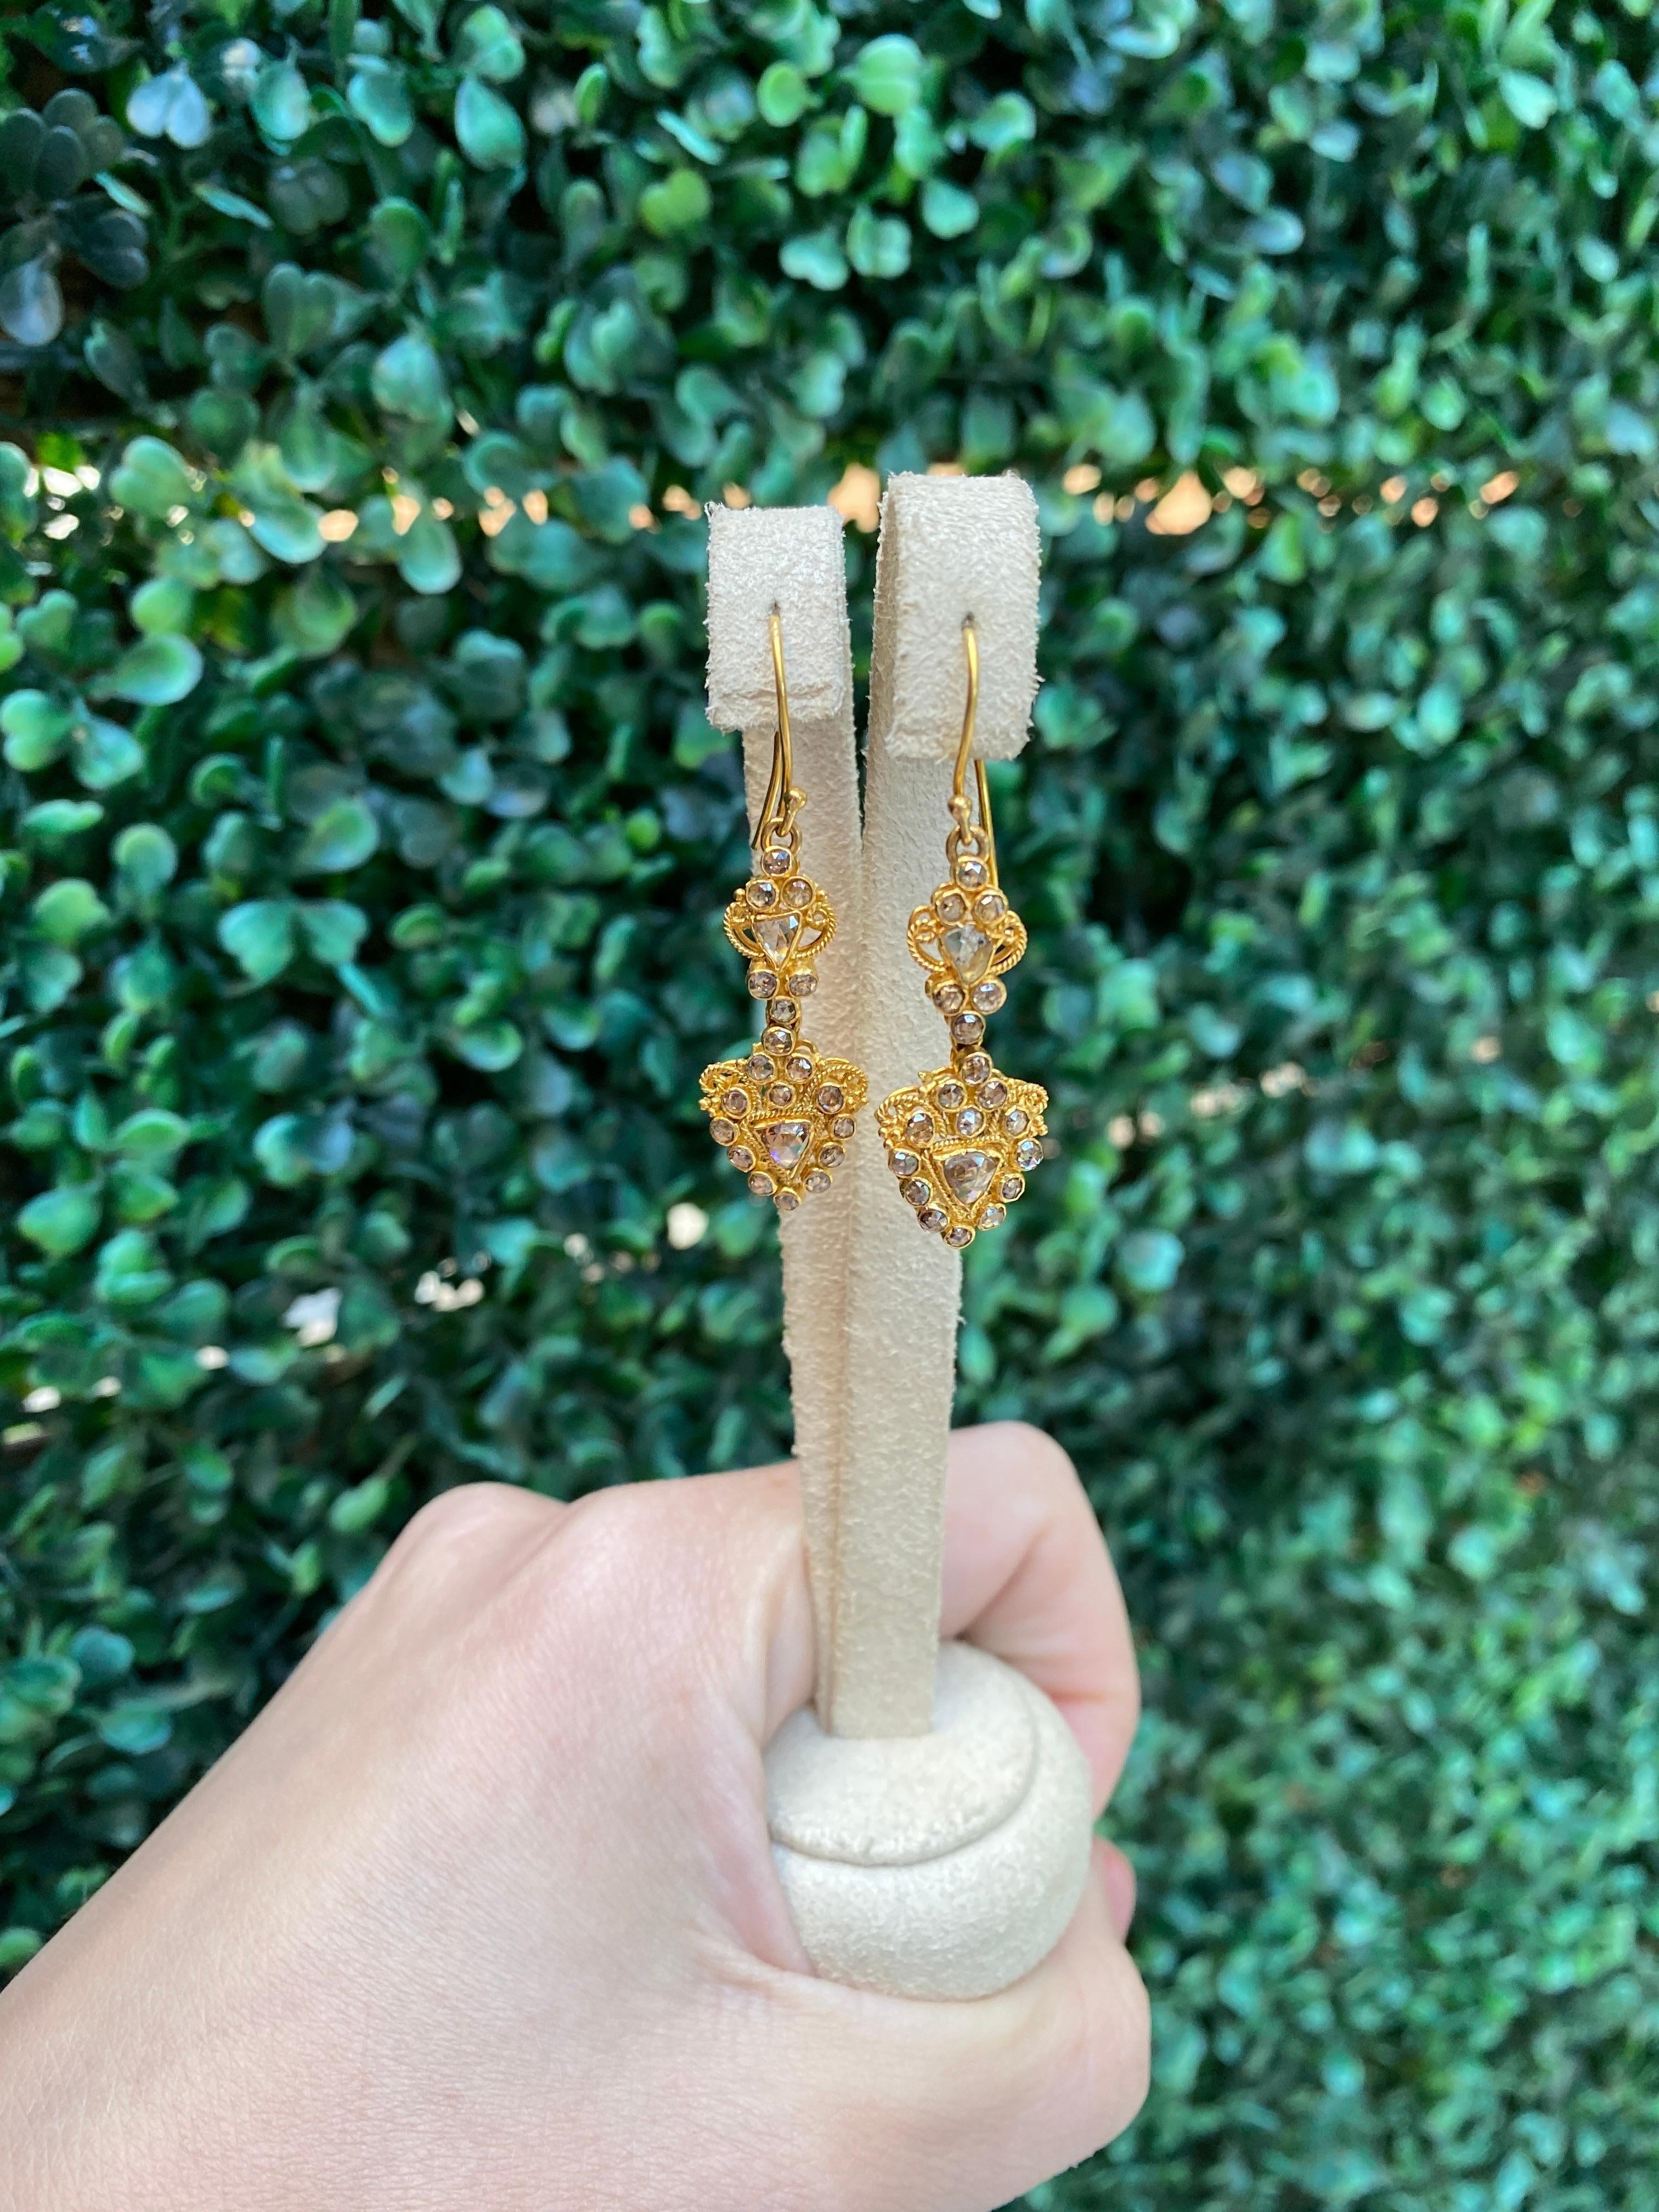 22 Karat Yellow Gold 1.75 Carat Total Weight Rose Cut Diamond Dangle Earrings In Excellent Condition For Sale In Houston, TX